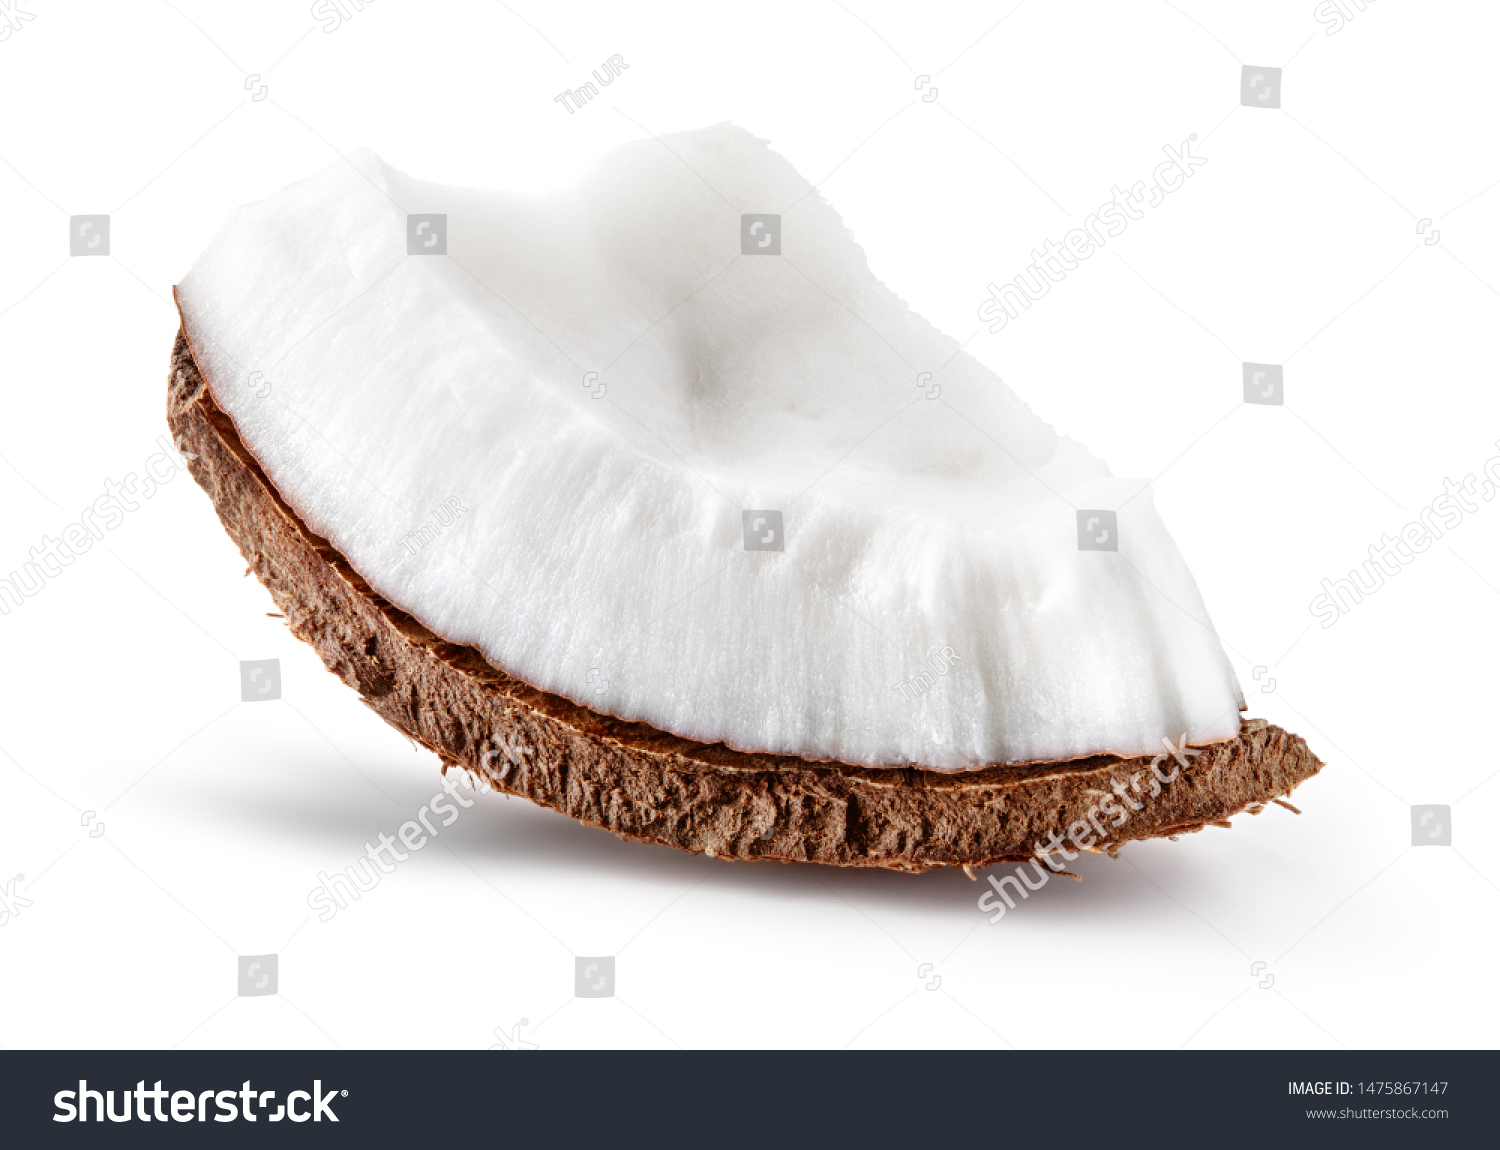 Coconut slice front view. Coconut piece side view isolated. Coco on white. #1475867147